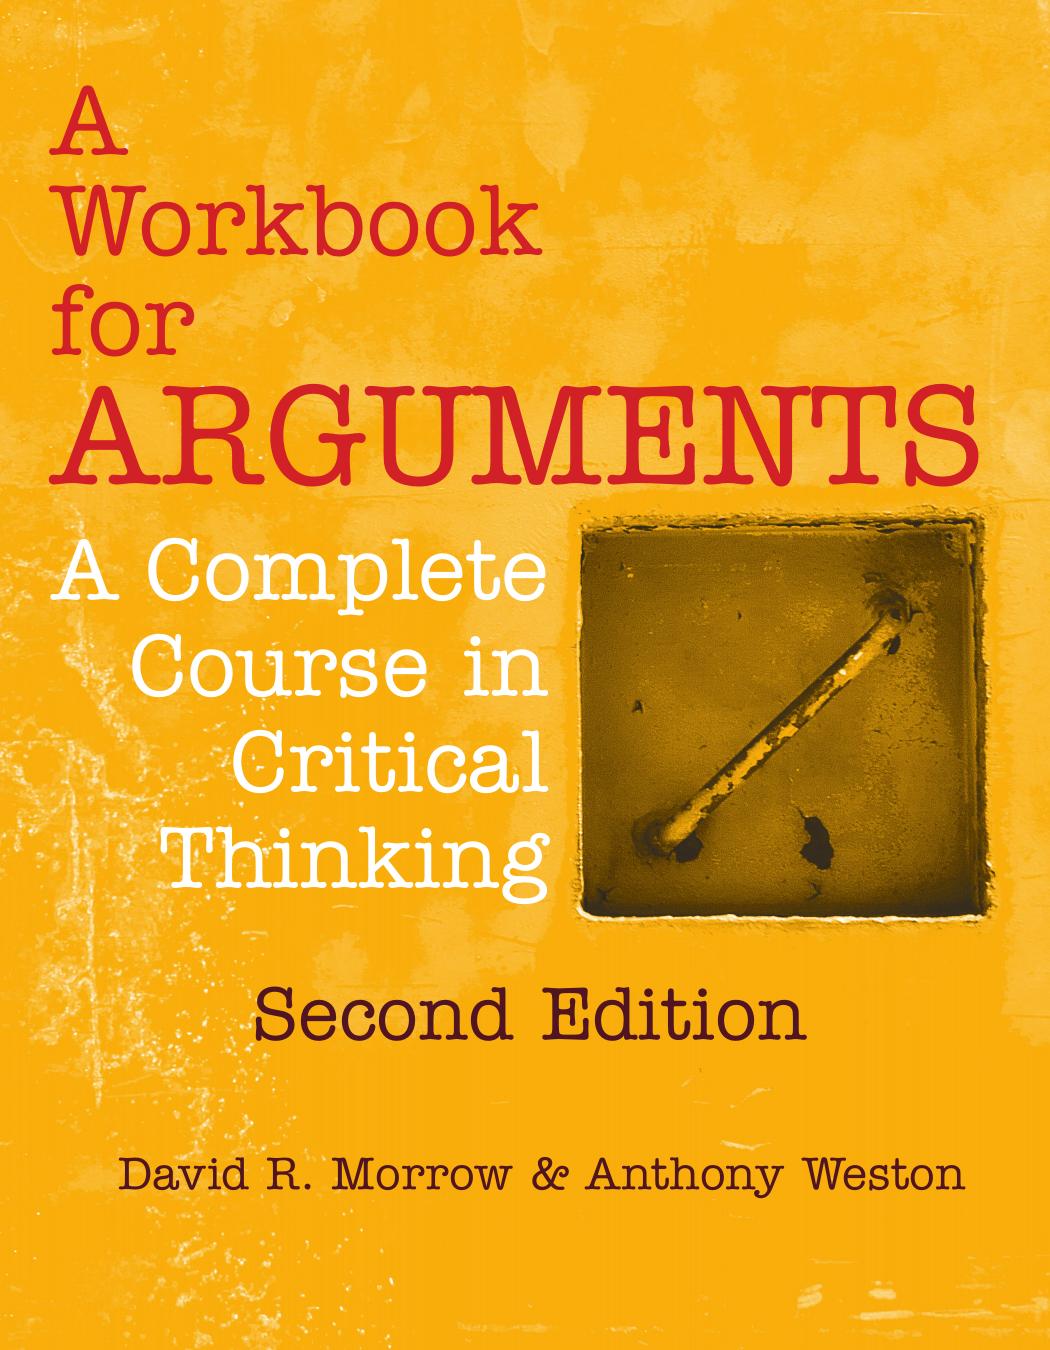 Workbook for Arguments, A Complete Course in Critical Thinking 2nd Edition, A.jpg